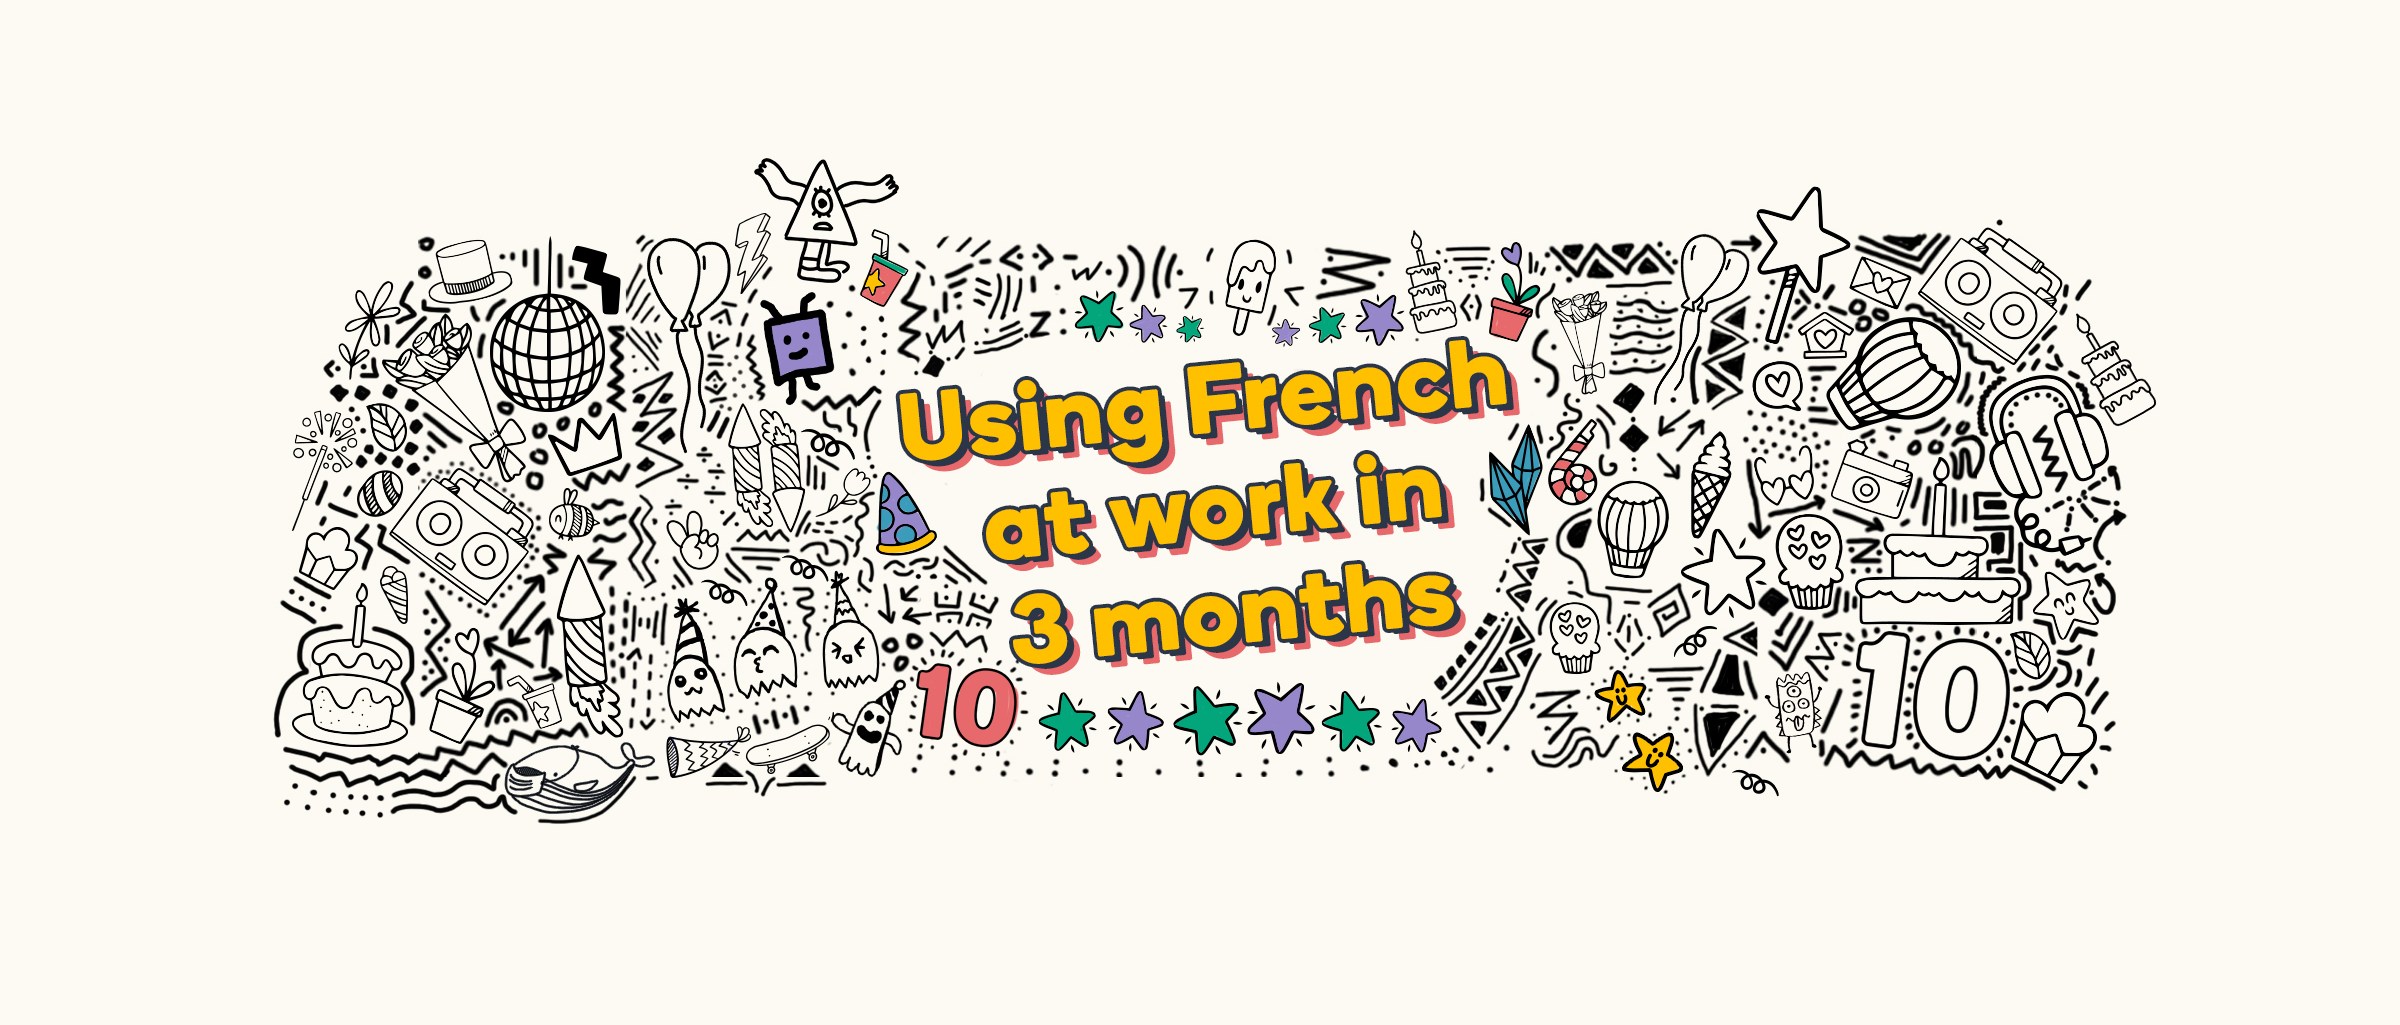 Using French at work in 3 months 💪